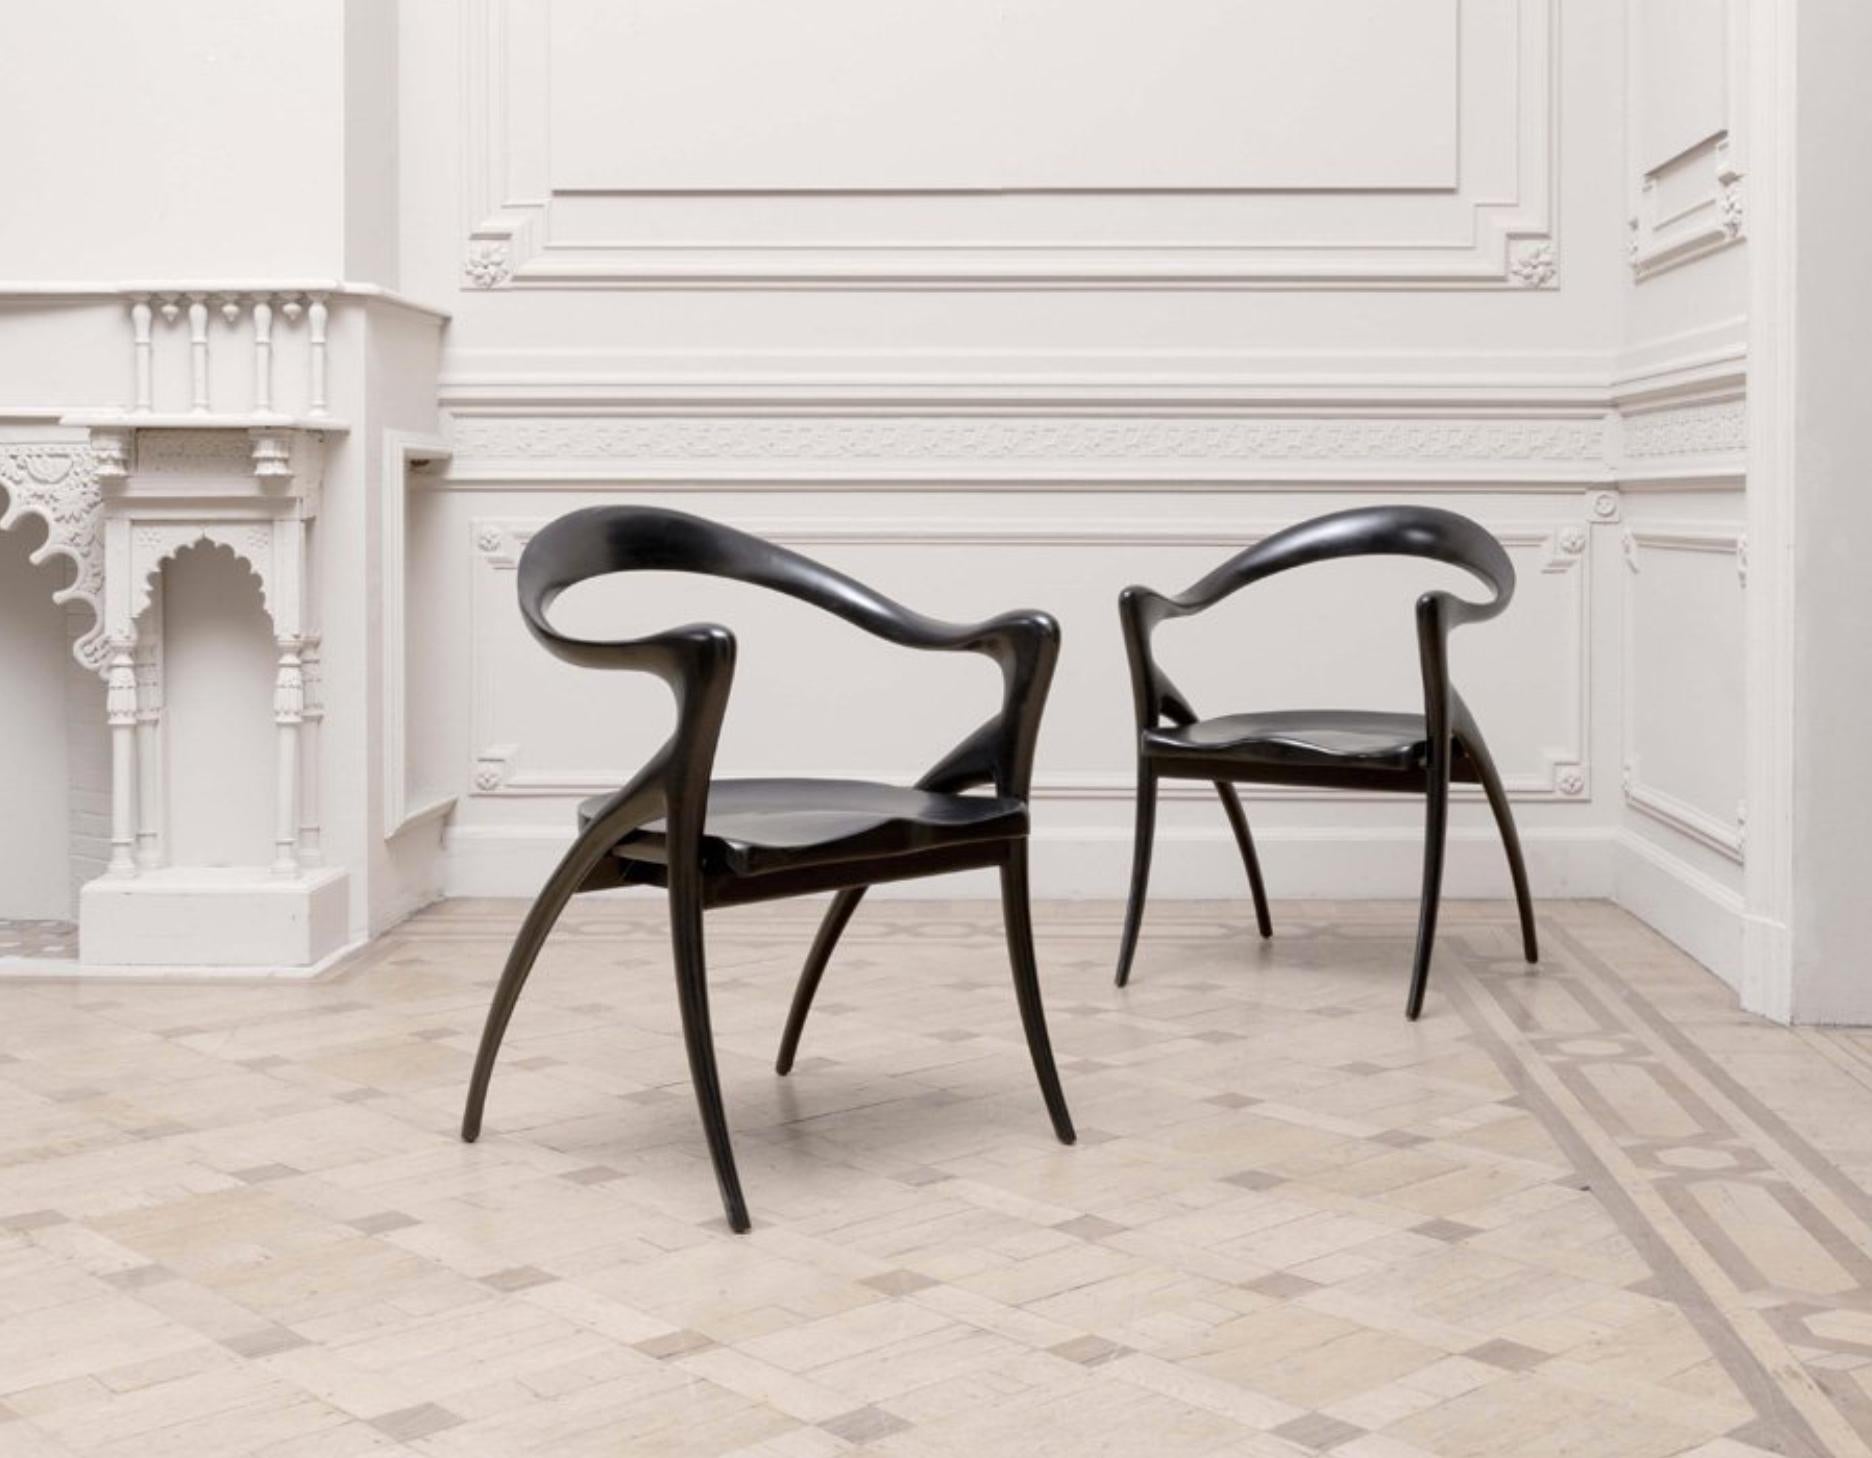 Grands fauteuils by Olivier de Schrijver (born in 1958) in black satin color.
Model Ode à la femme with mahogany wavy headband extended by the armrests and the base, curved seats.